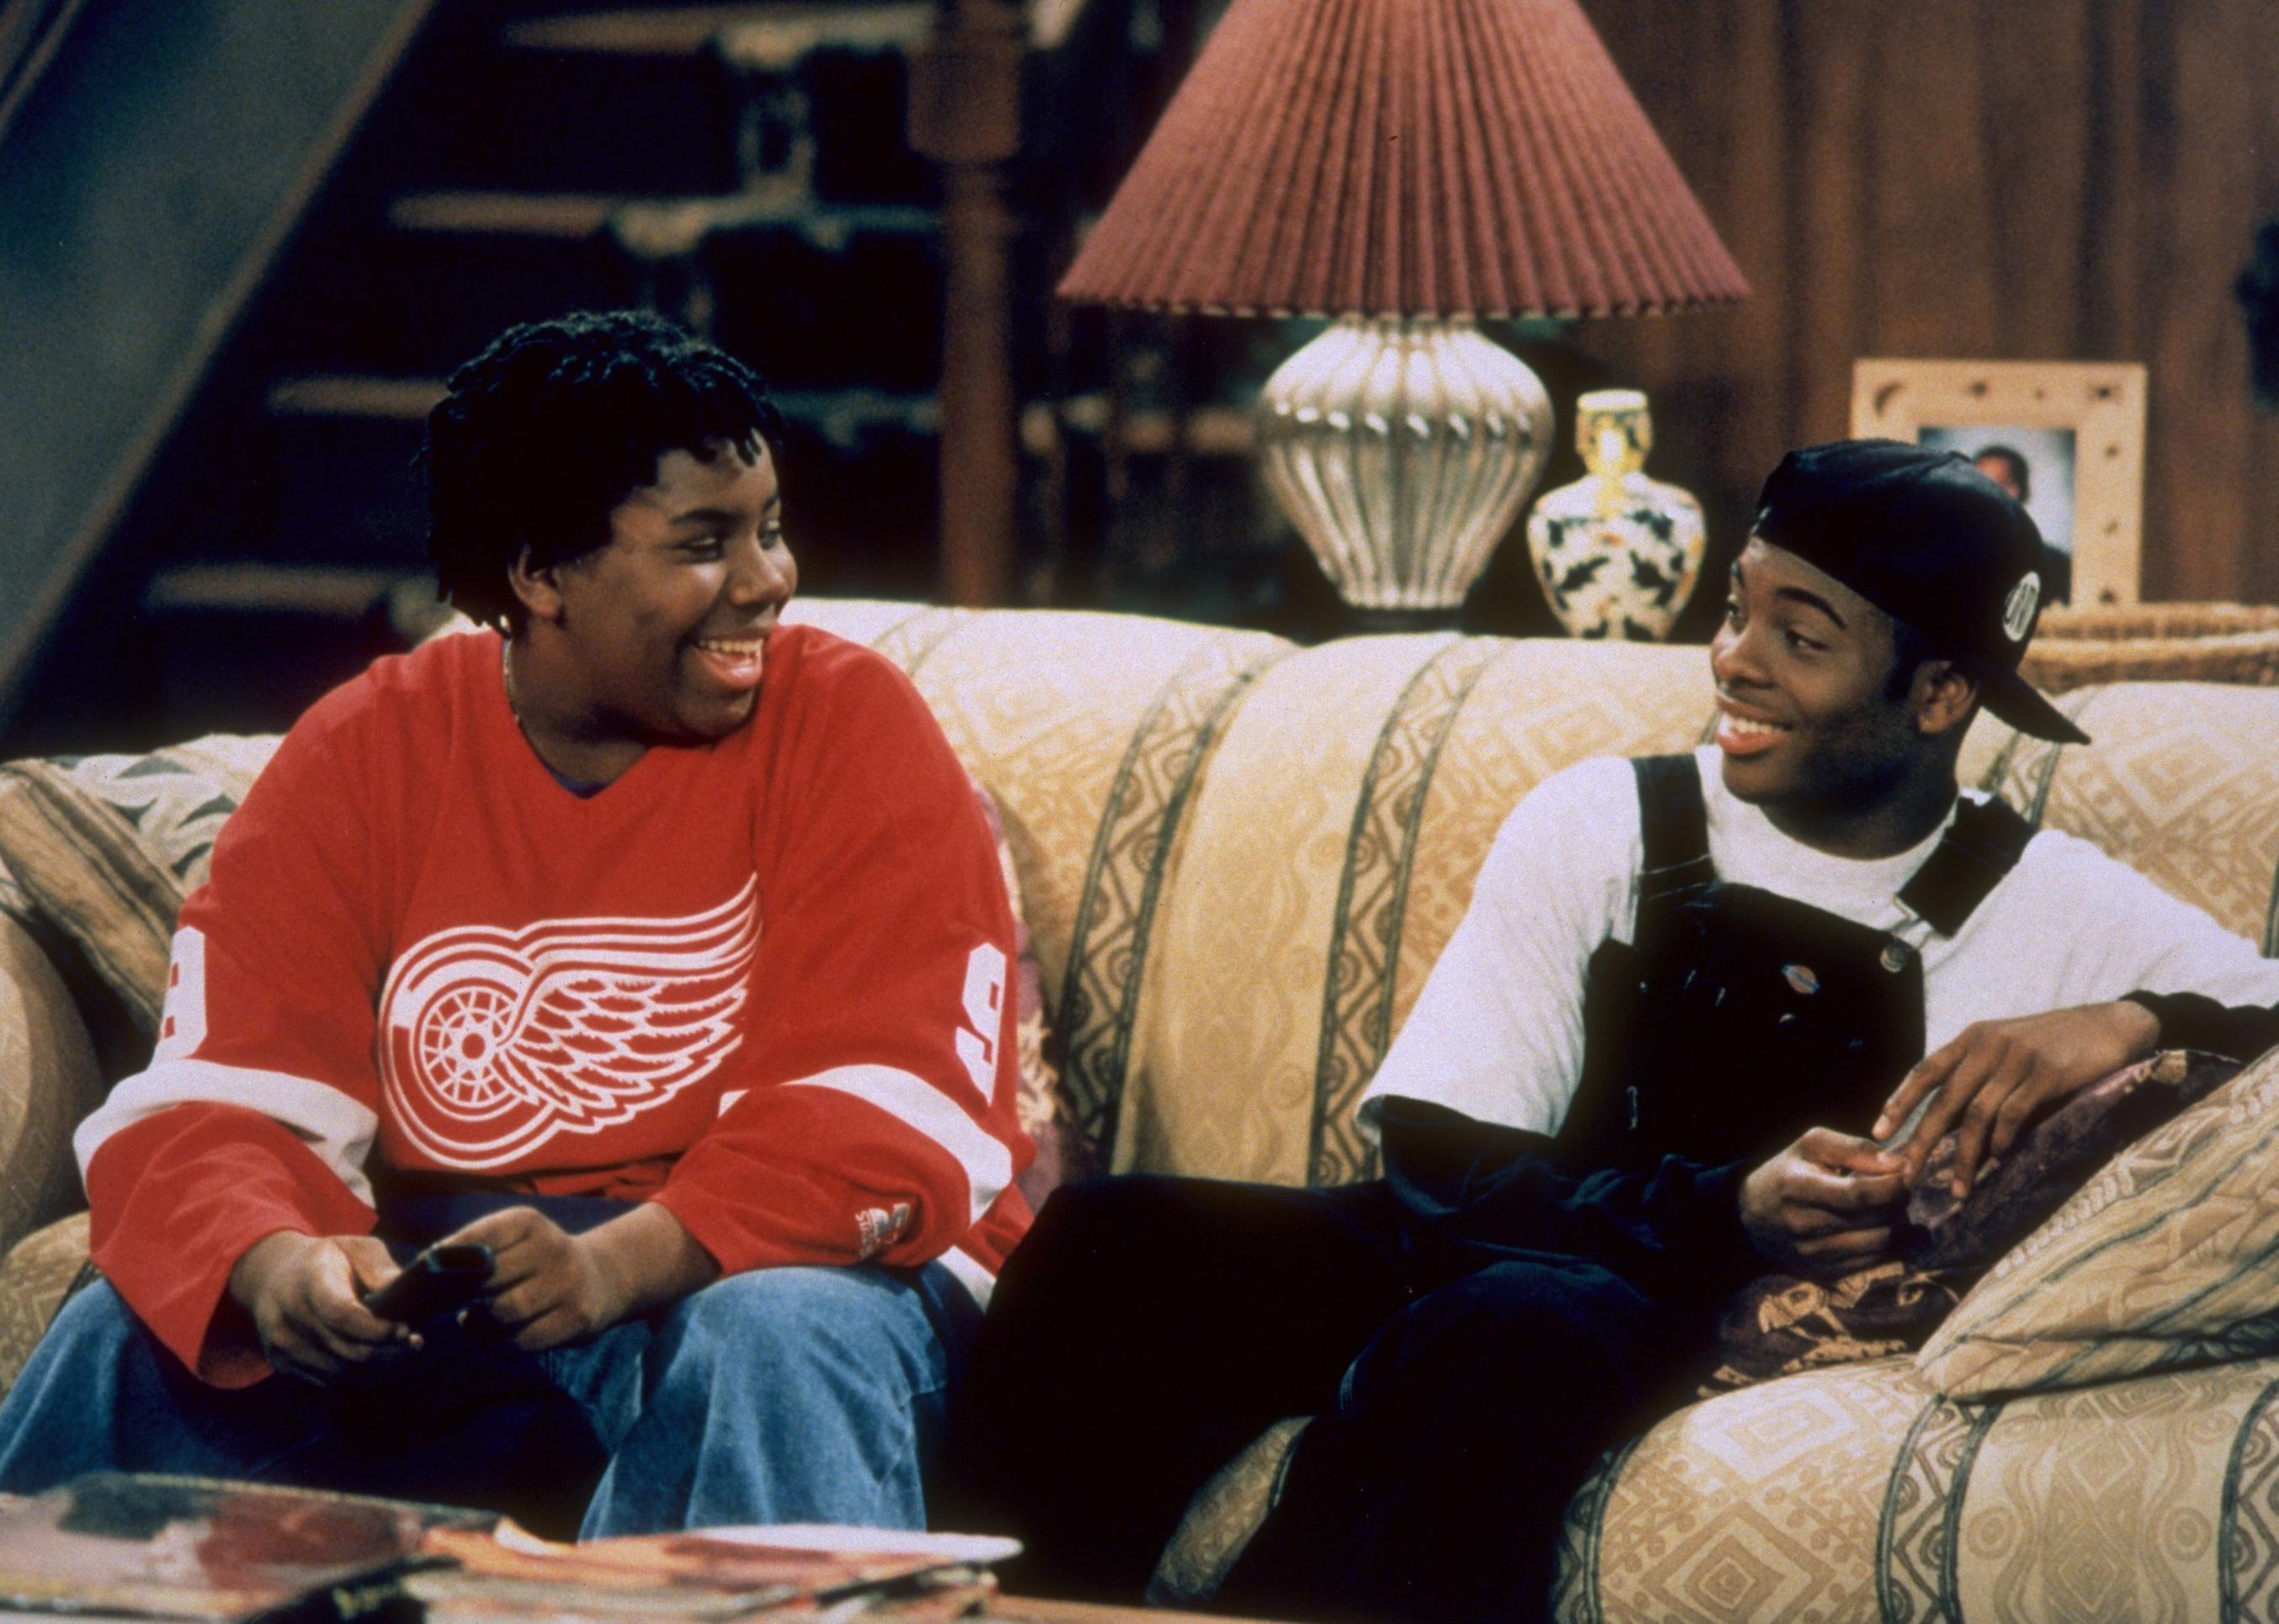 Kenan Thompson and Kel Mitchell laughing on a couch.